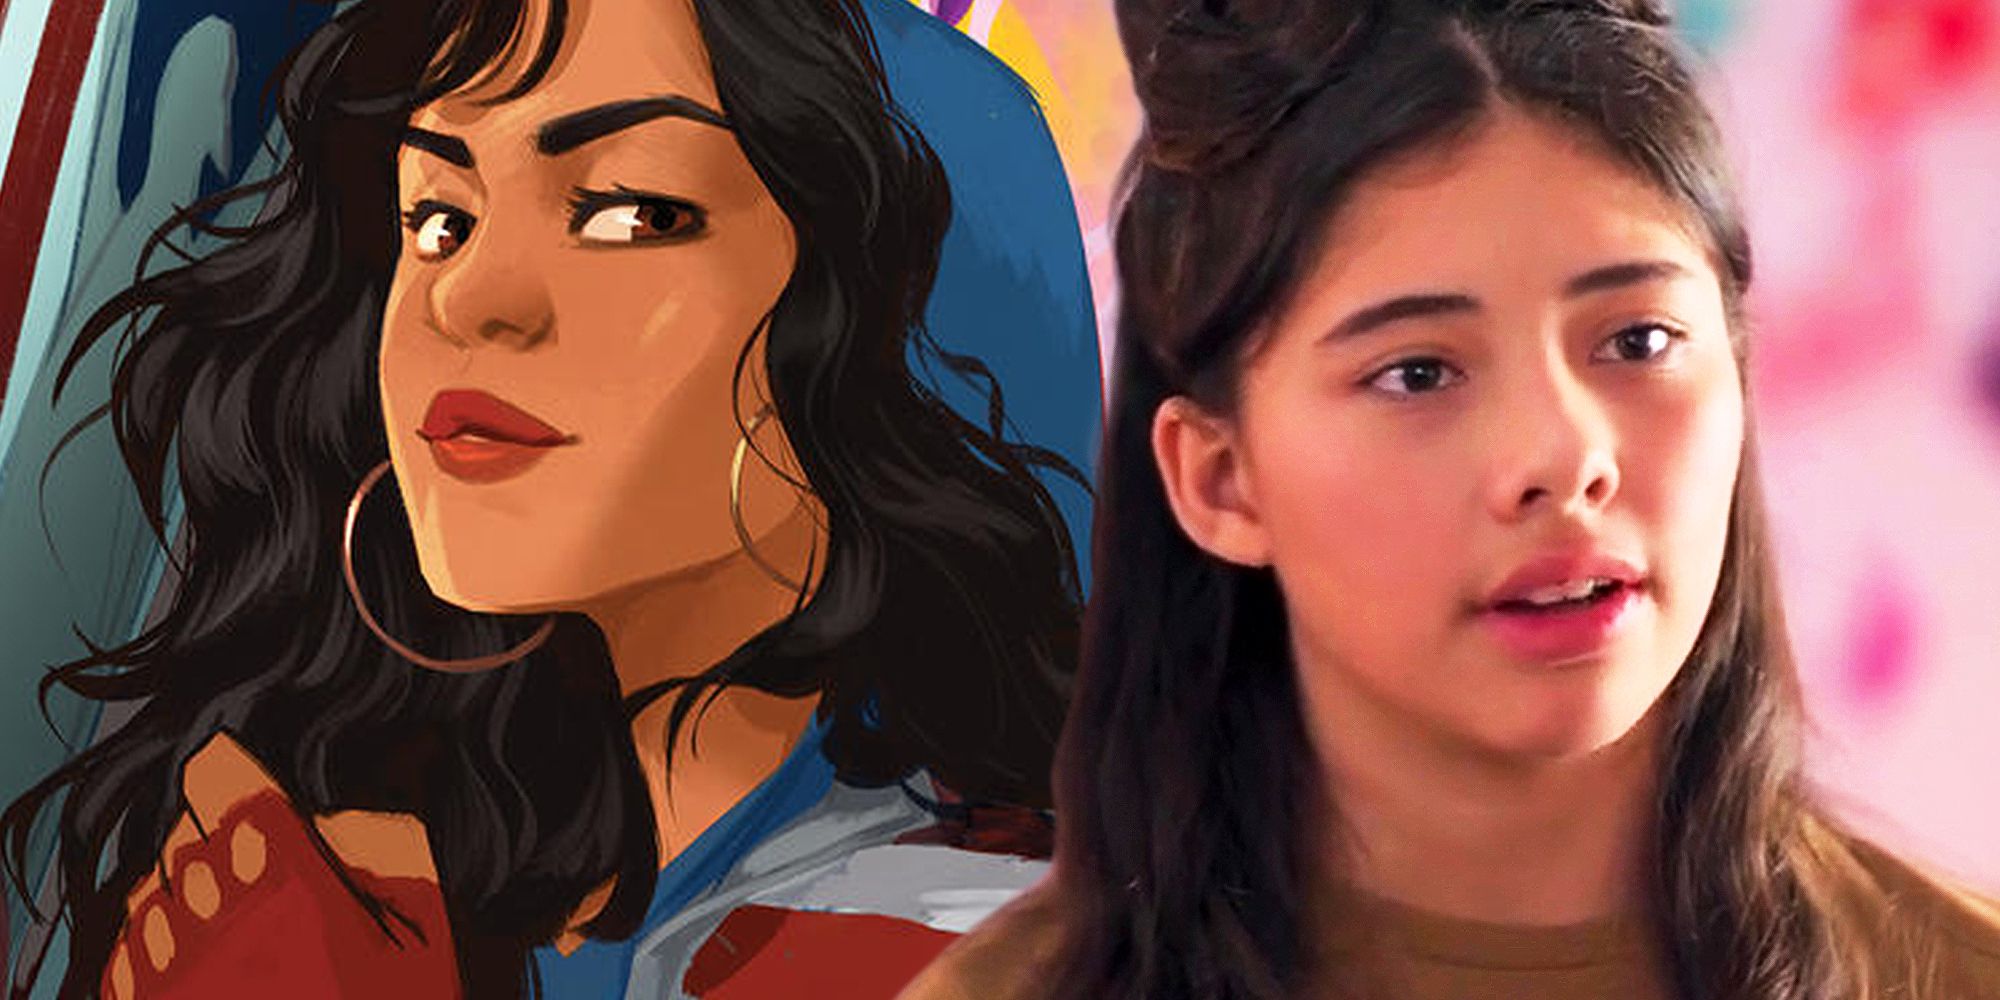 Blended image of Xochitl Gomez and America Chavez